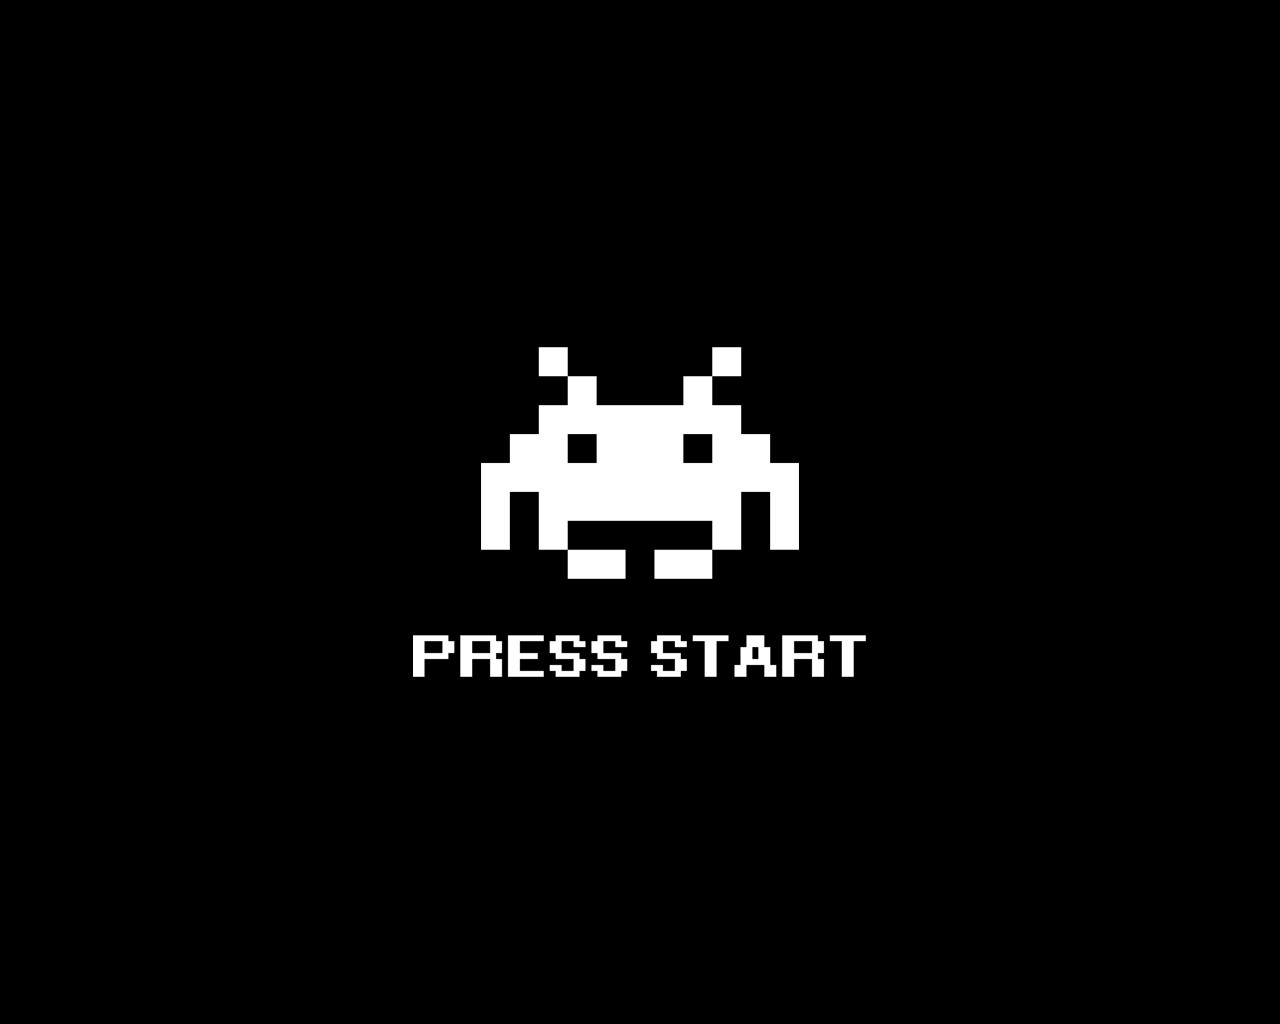 Space Invaders, Retro Games, Black Background Wallpaper